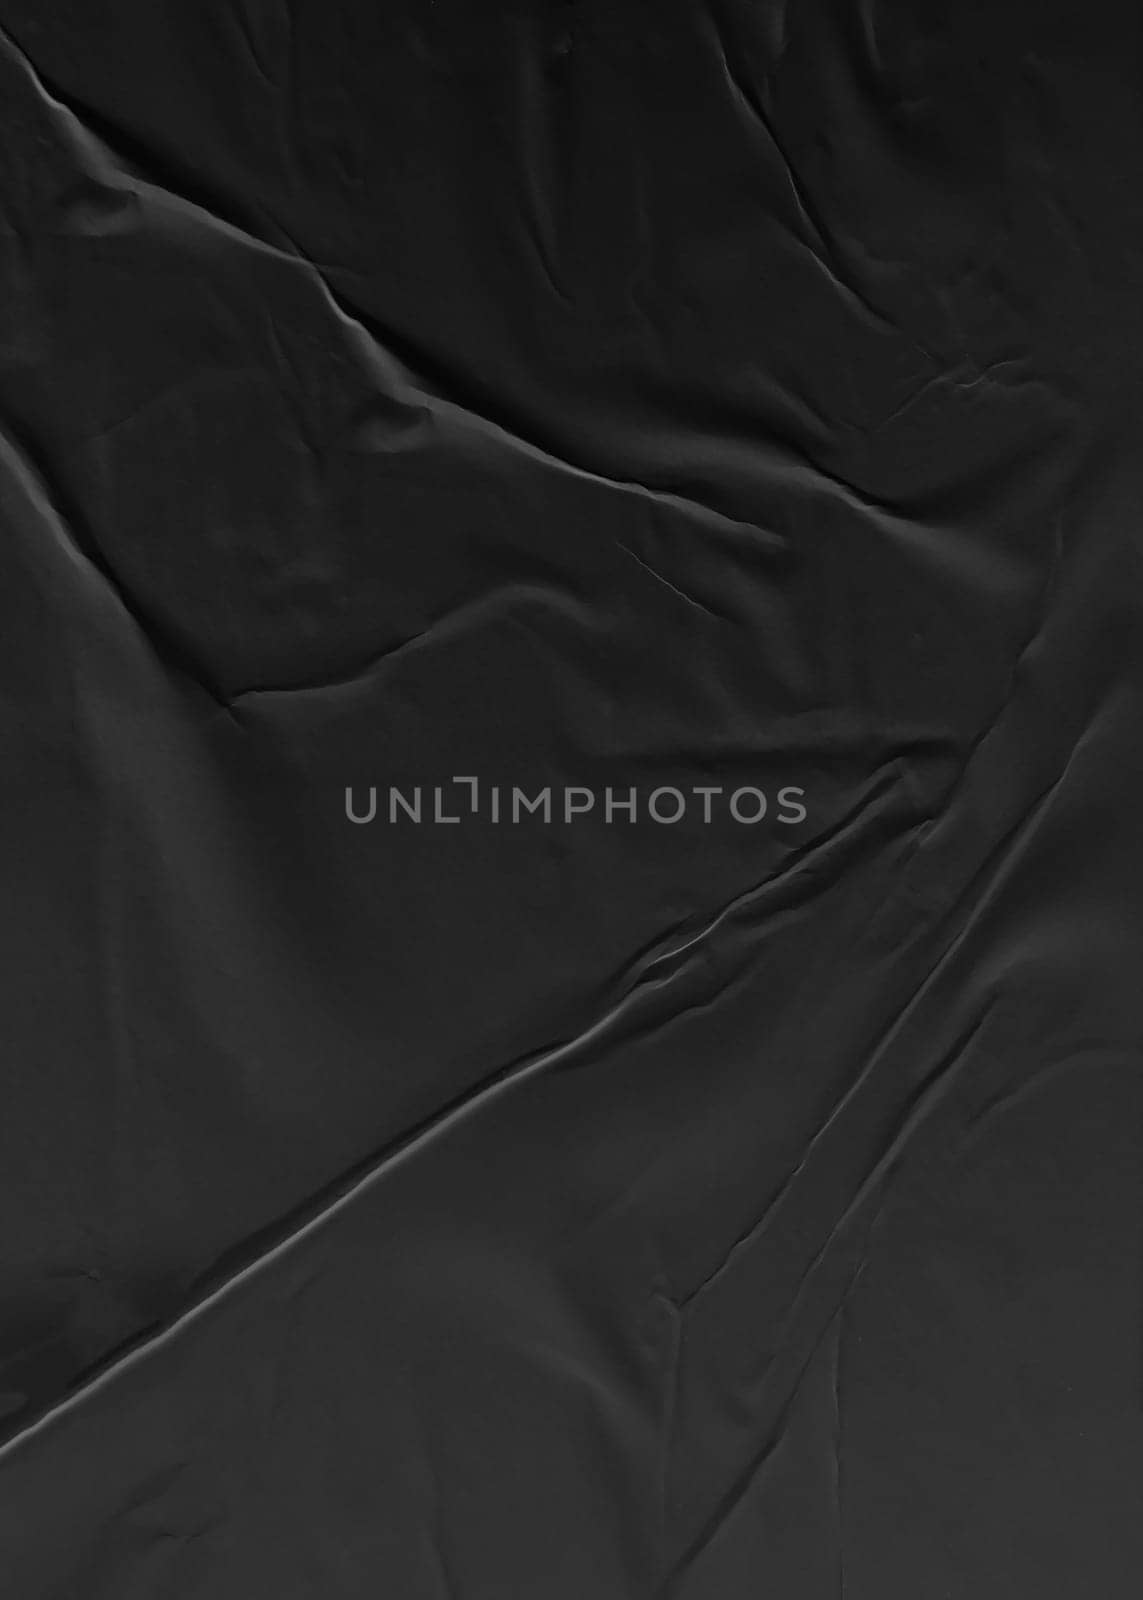 Background texture of crumpled black vertical paper